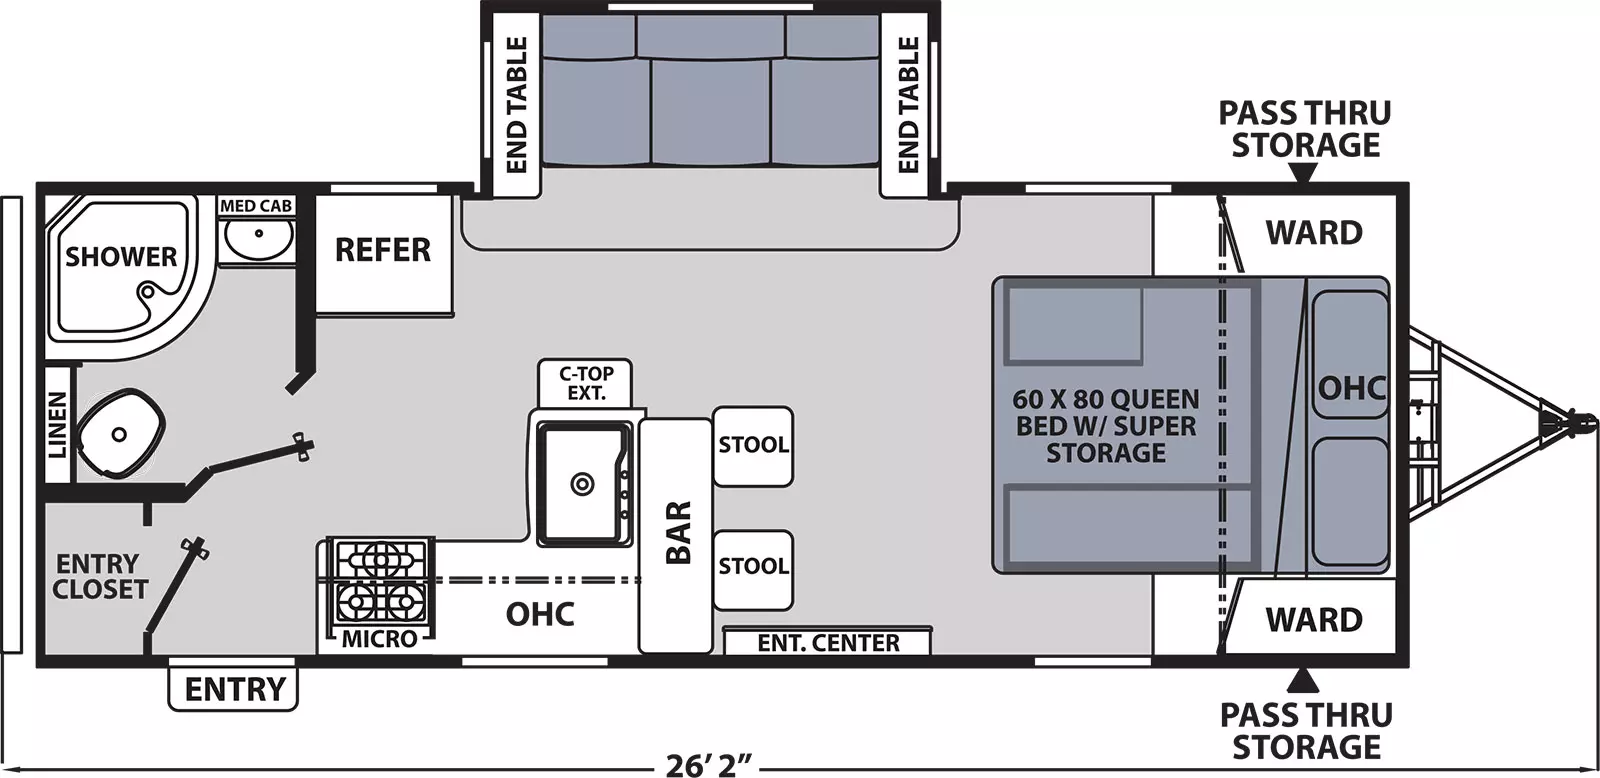 The 211RBS has one slide out on the off-door side and one entry door on the door side. Interior layout from front to back: front bedroom with foot facing queen bed, super storage under bed, overhead cabinet, and wardrobes on either side of the bed; kitchen living dining area with off-door side slide out containing sofa with end tables on either side; entertainment center on door side; door side kitchen containing two bar stools, countertop extension, sink, overhead cabinet, cook top stove, and microwave overhead; refrigerator on off-door side; rear off-door side bathroom; and rear door side entry closet.